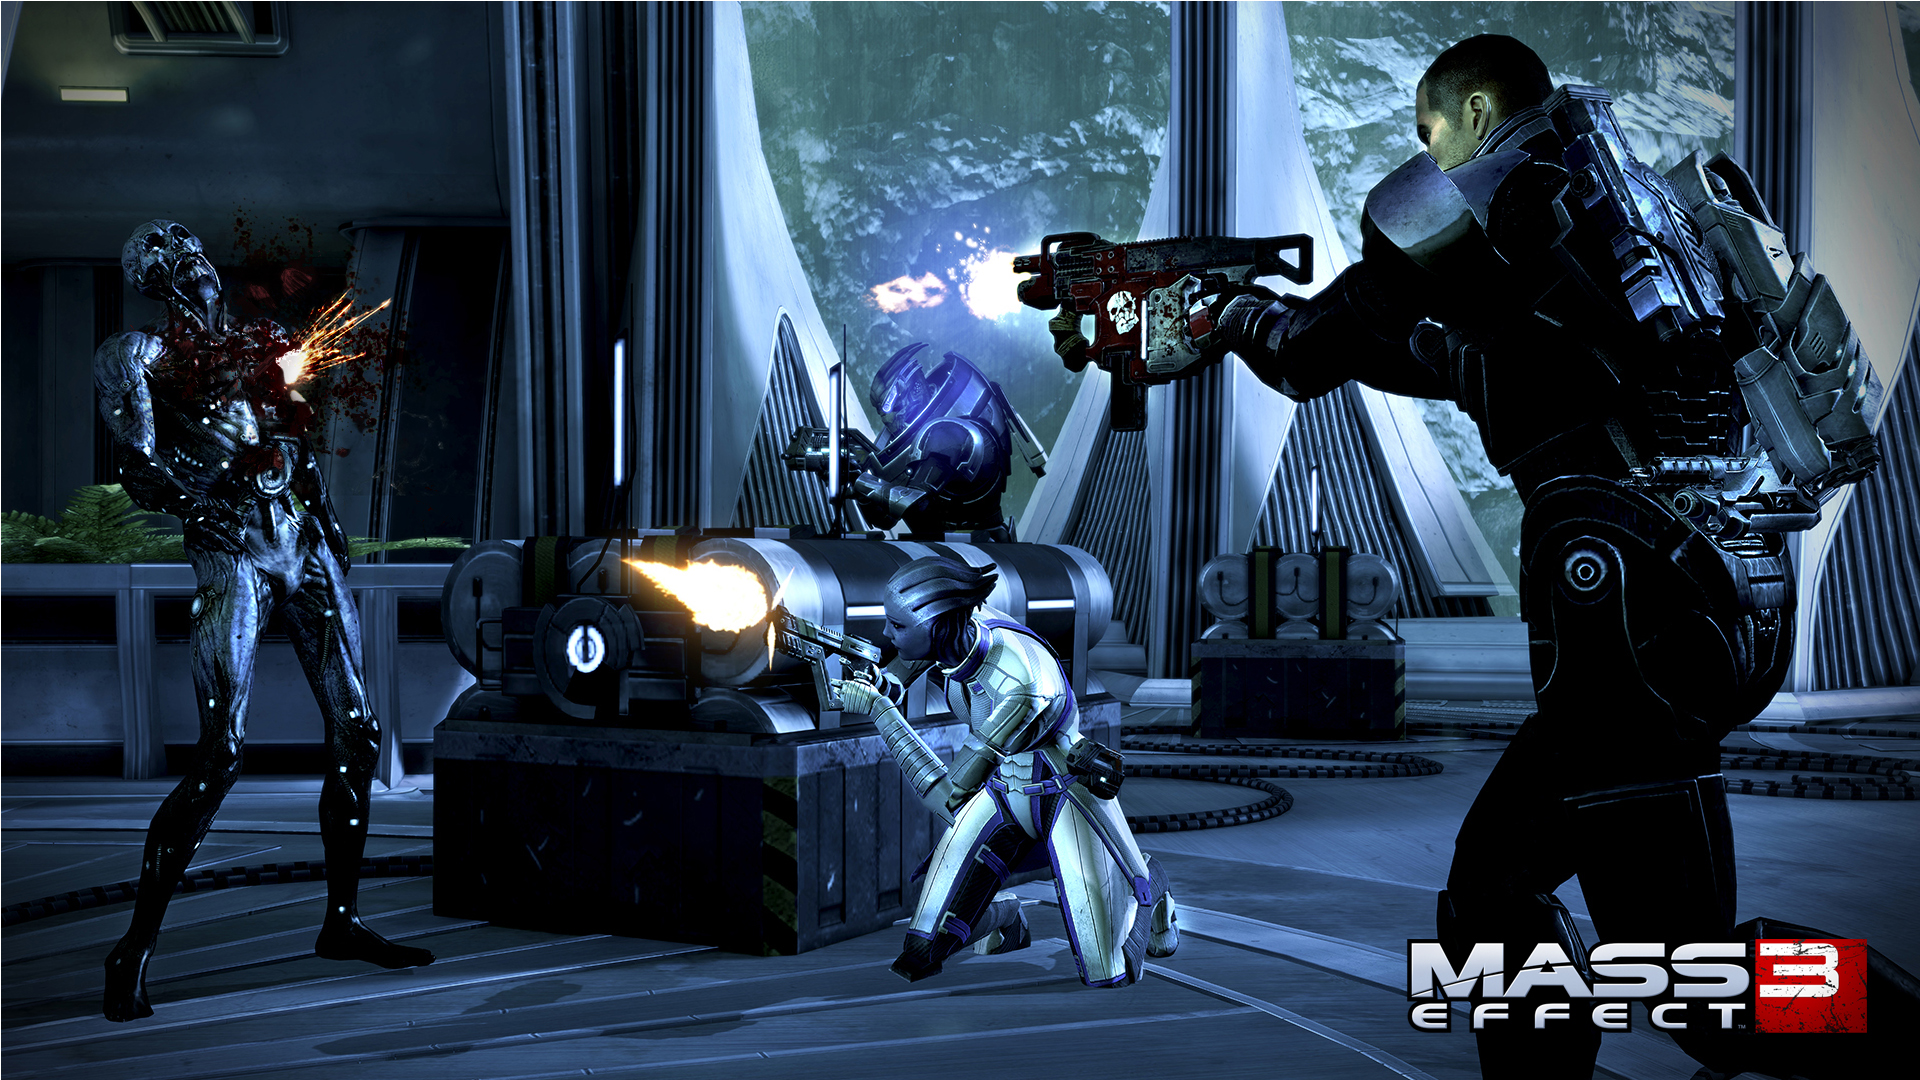 Media asset (photo, screenshot, or image in full size) related to contents posted at 3dfxzone.it | Image Name: mass-effect-3-leviathan_4.jpg